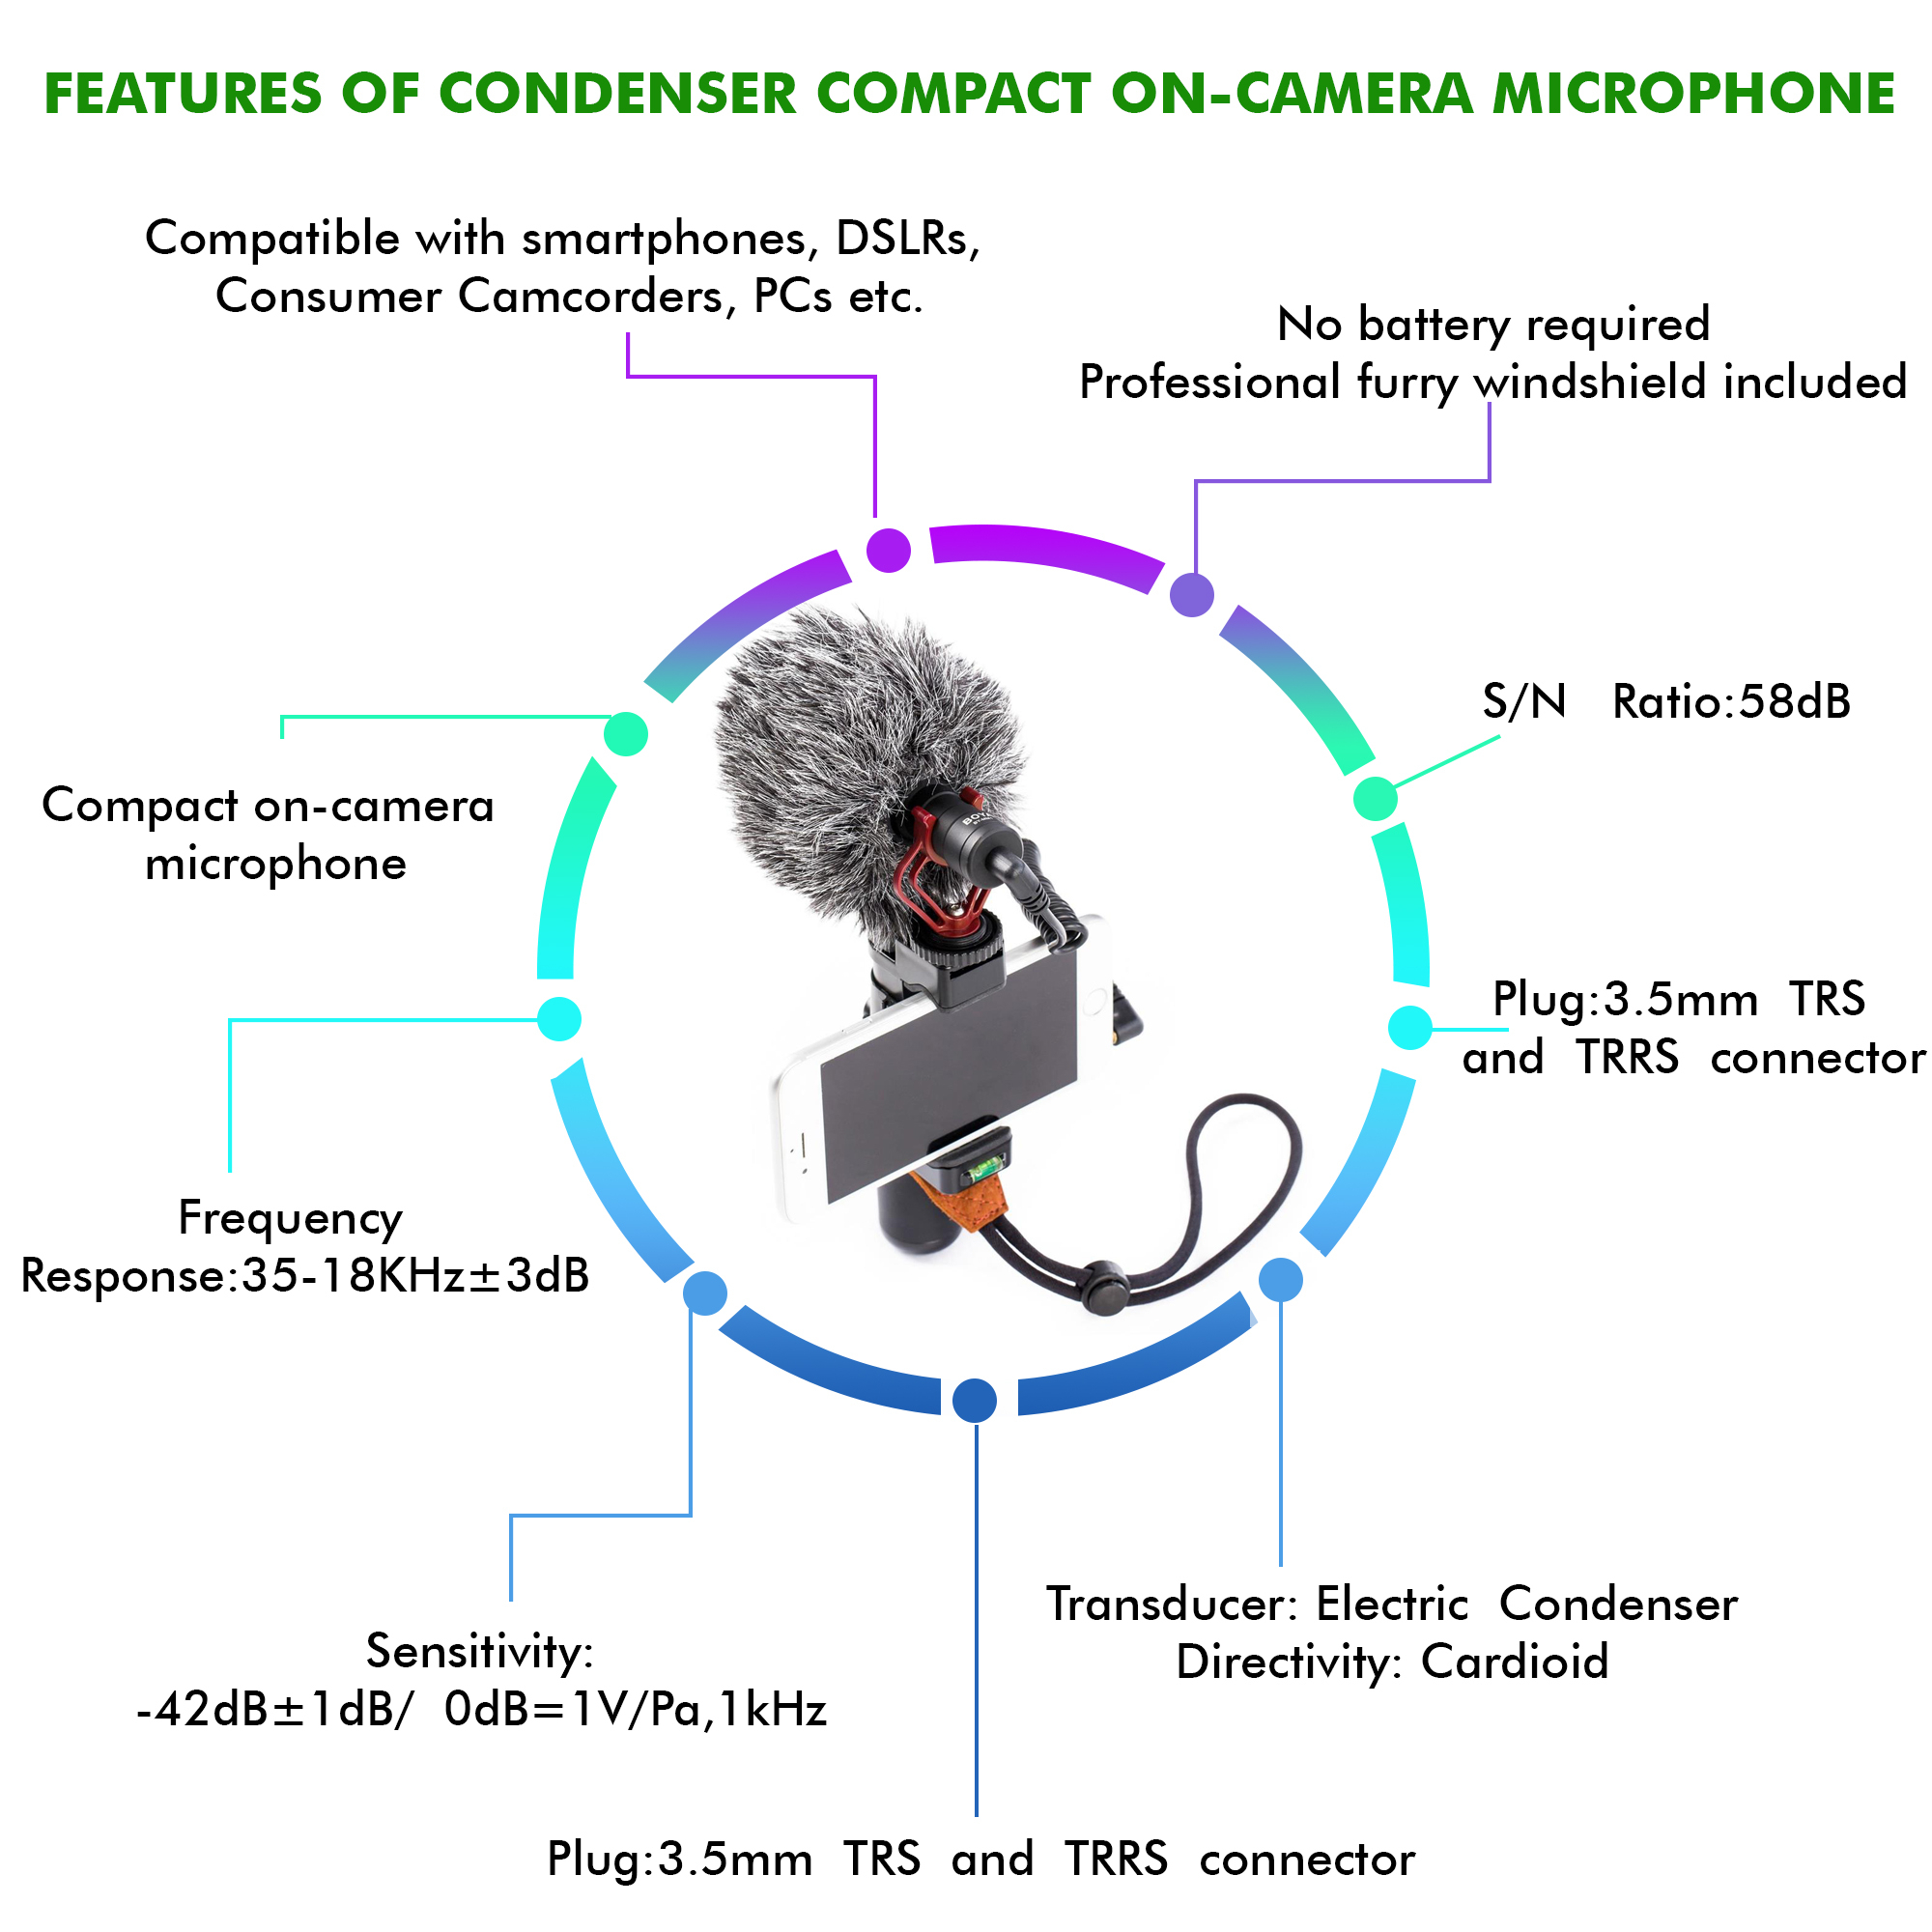 Technical Pro Condenser Compact On-camera Microphone, For Vlogging With Smartphones, DSLRs, Consumer Camcorders, PCs Etc